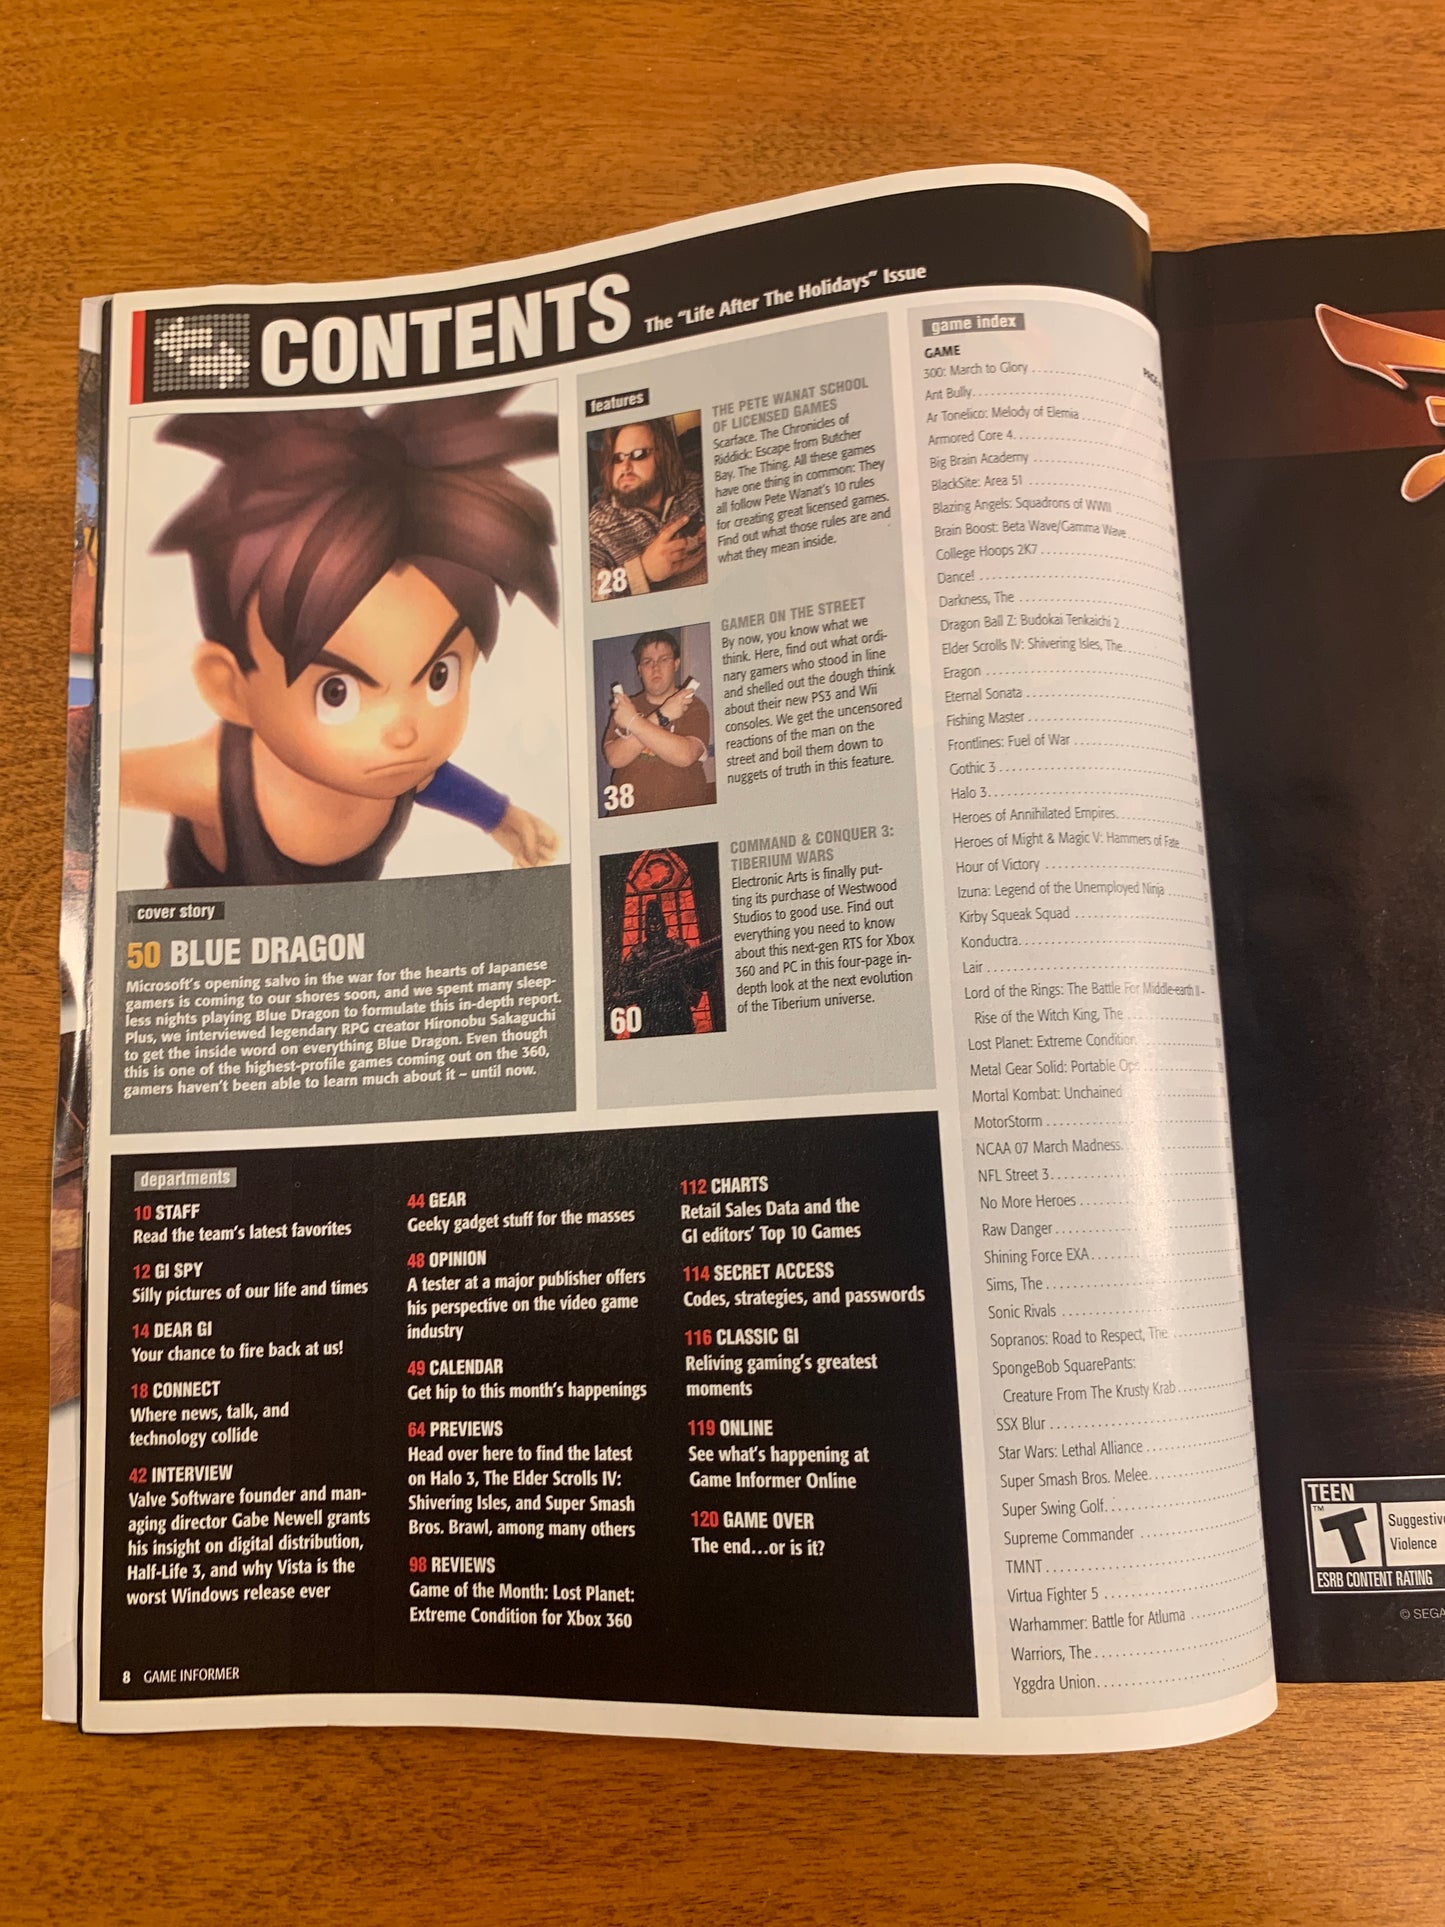 GameInformer, Blue Dragon and The Top 50 games of 2006, 2007